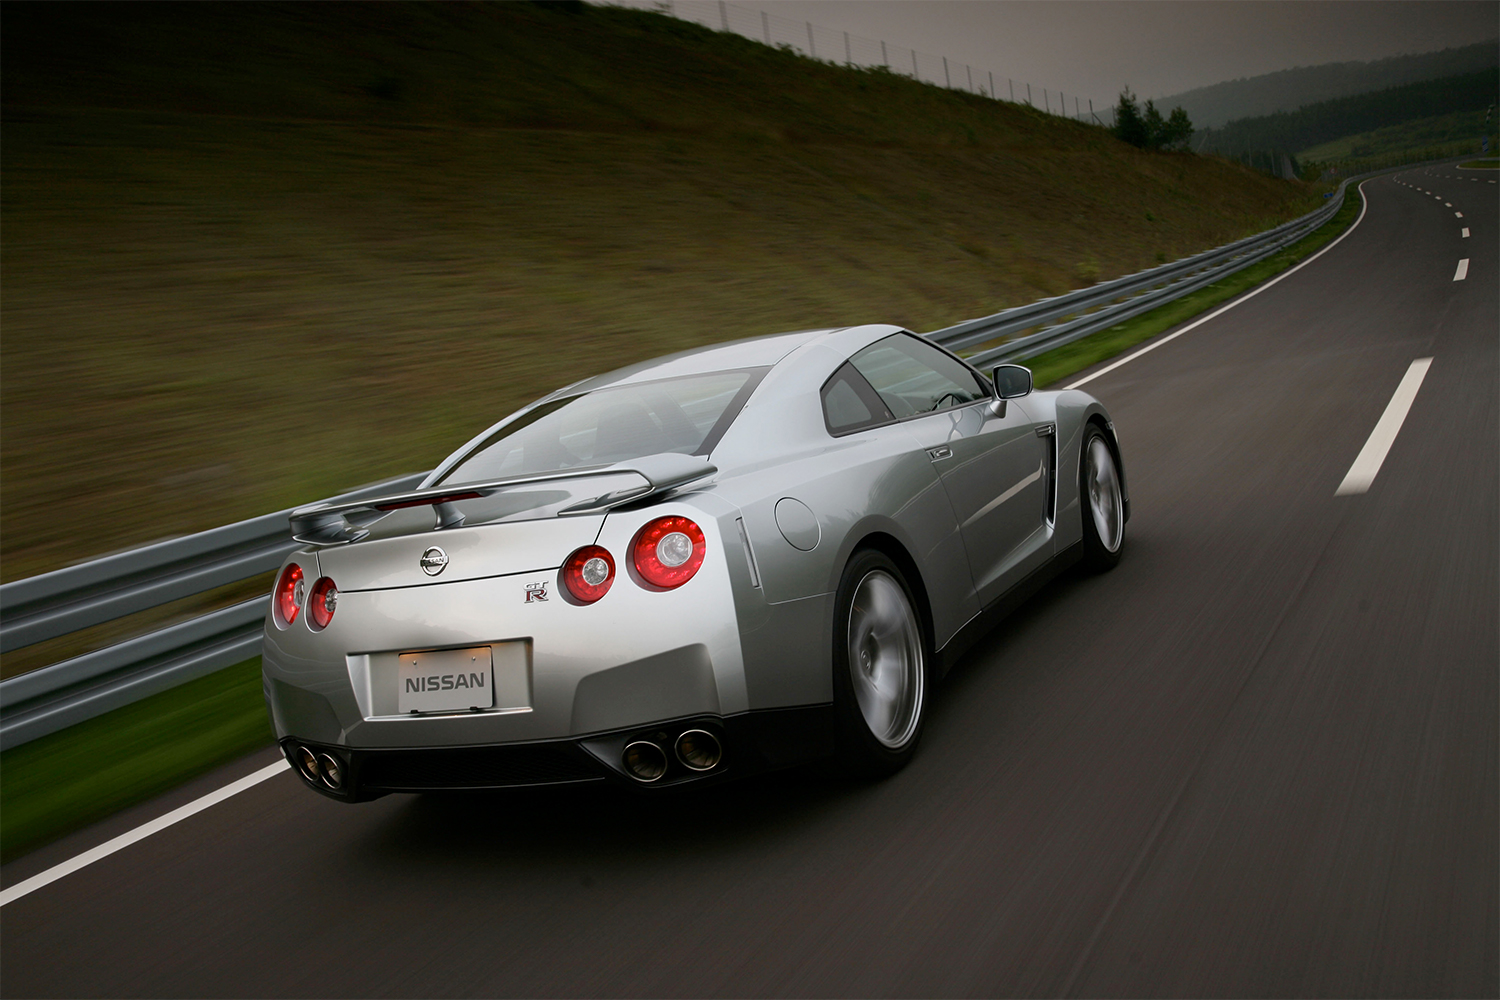 A 2009 Nissan GT-R R35 driving down a road, photographed from the rear